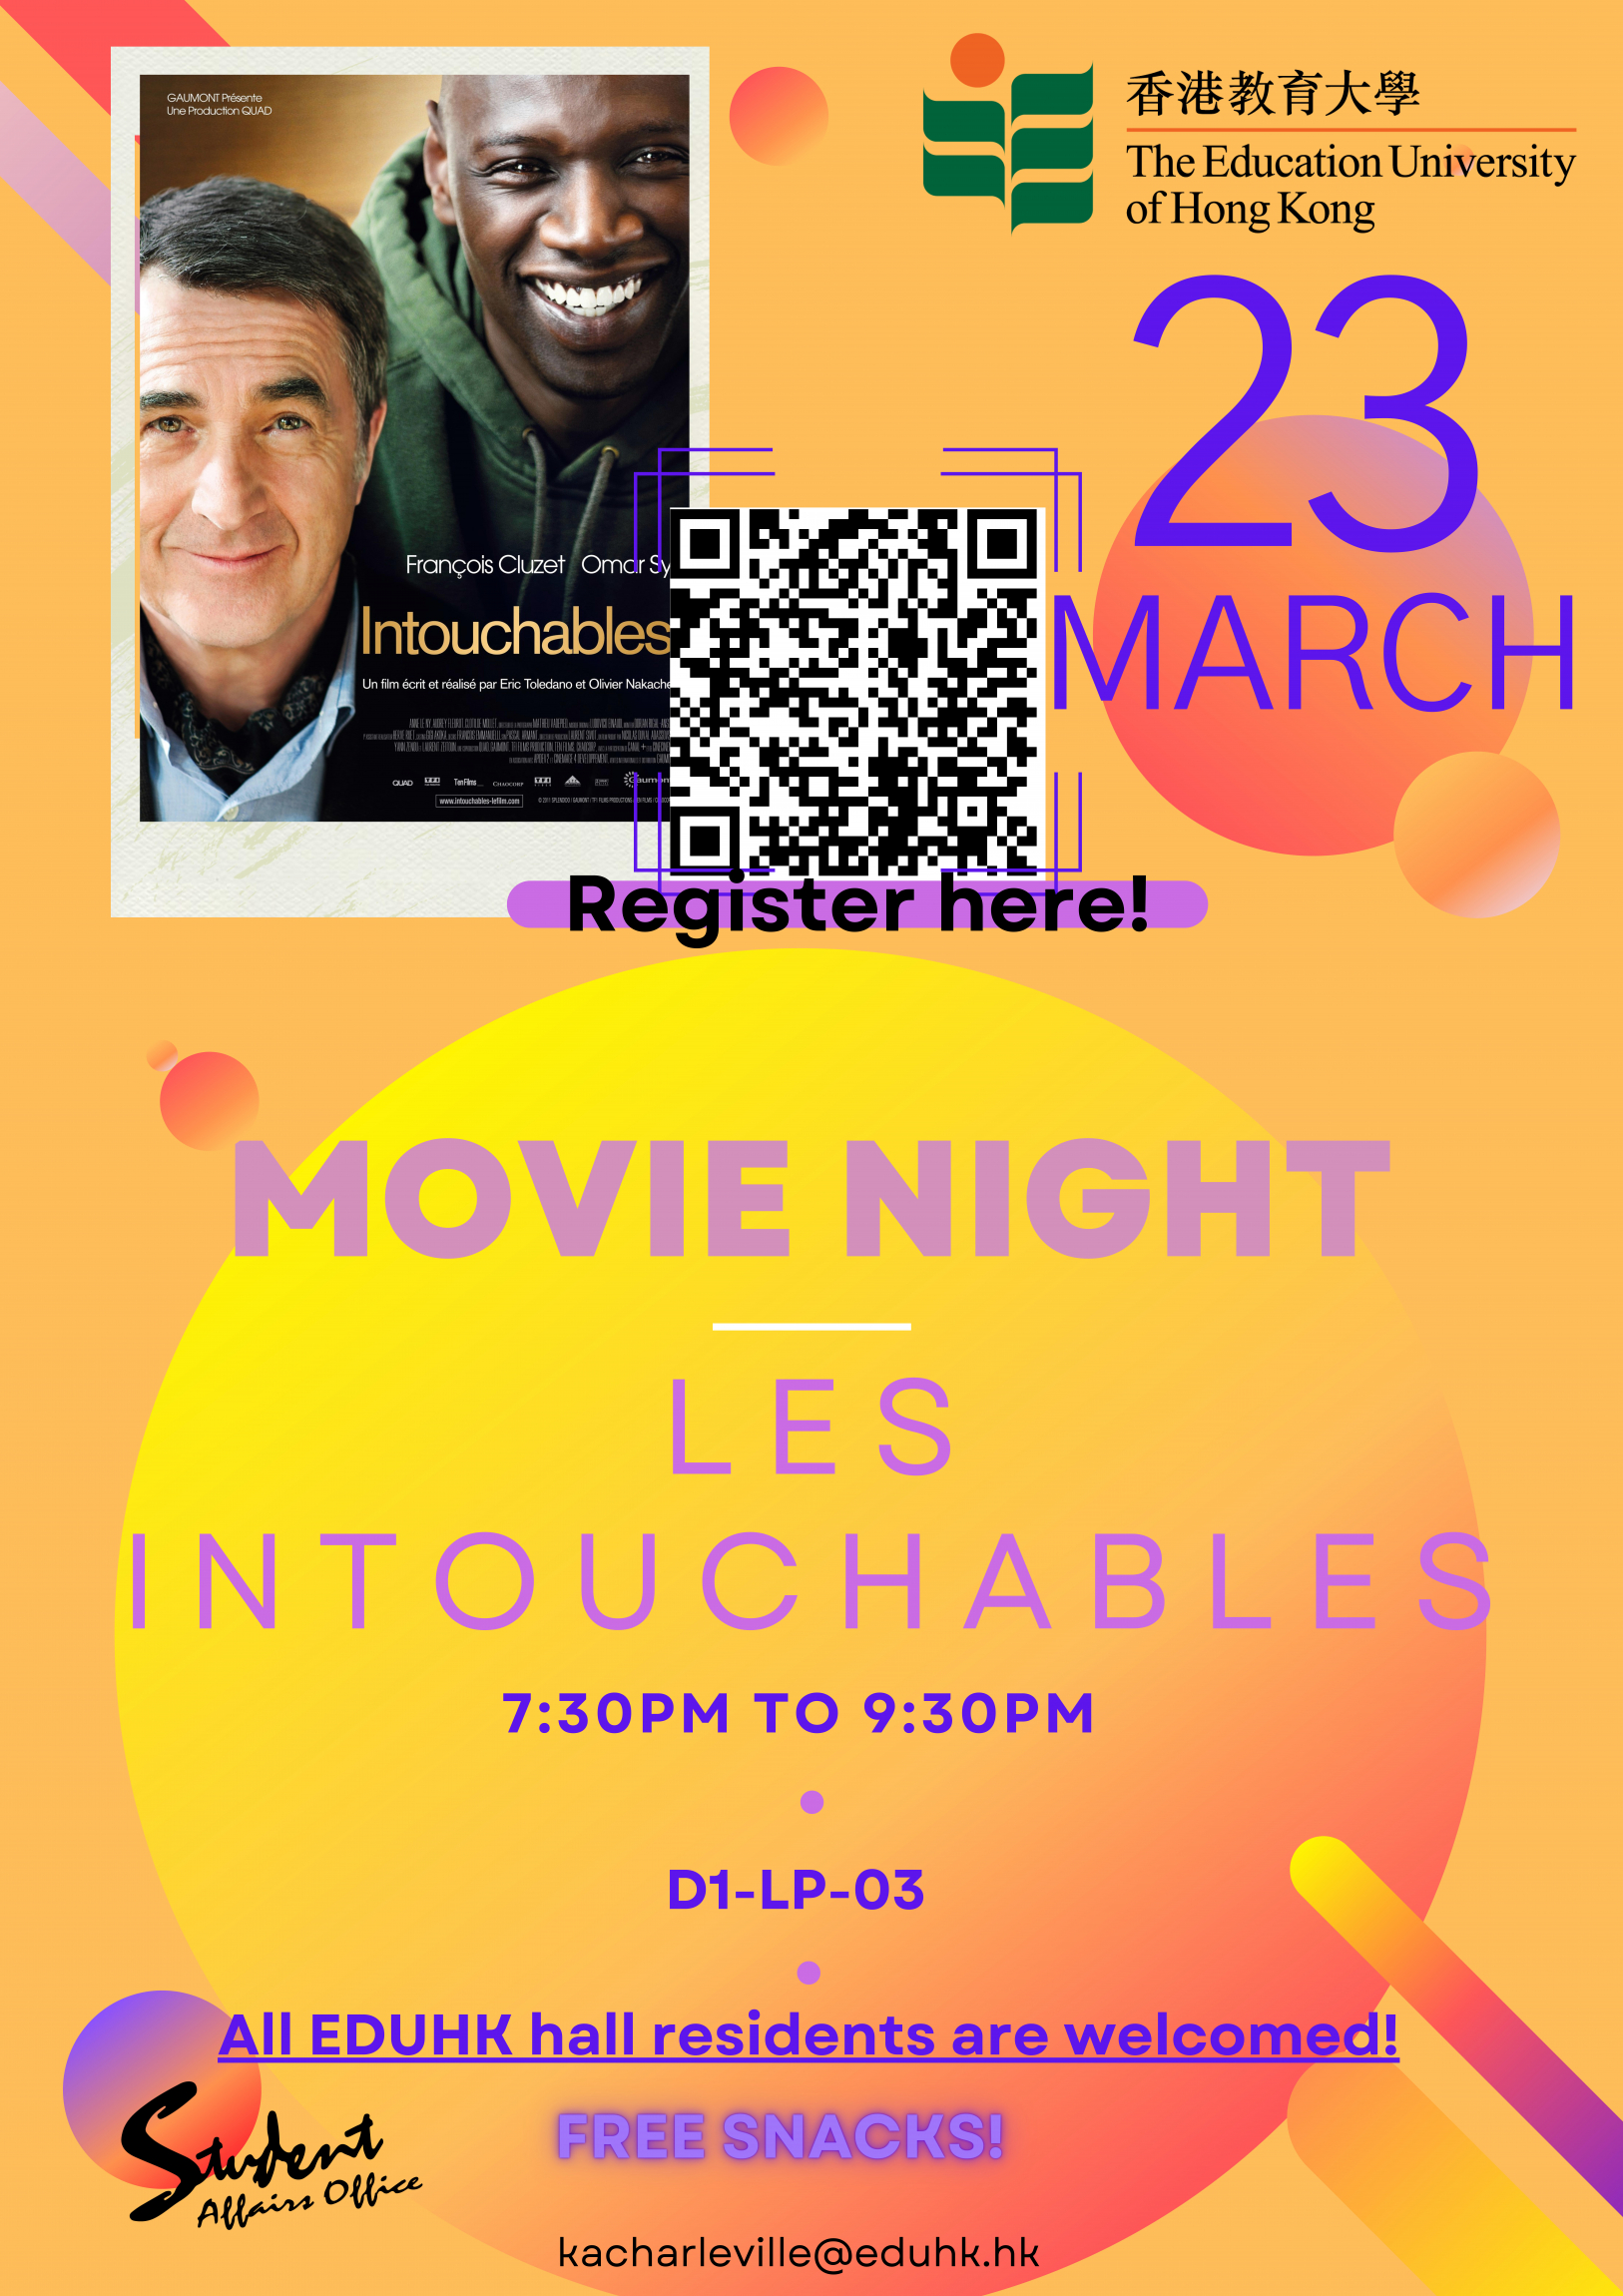 Self Photos / Files - MOVIE NIGHT LES INTOUCHABLES (1)_1 